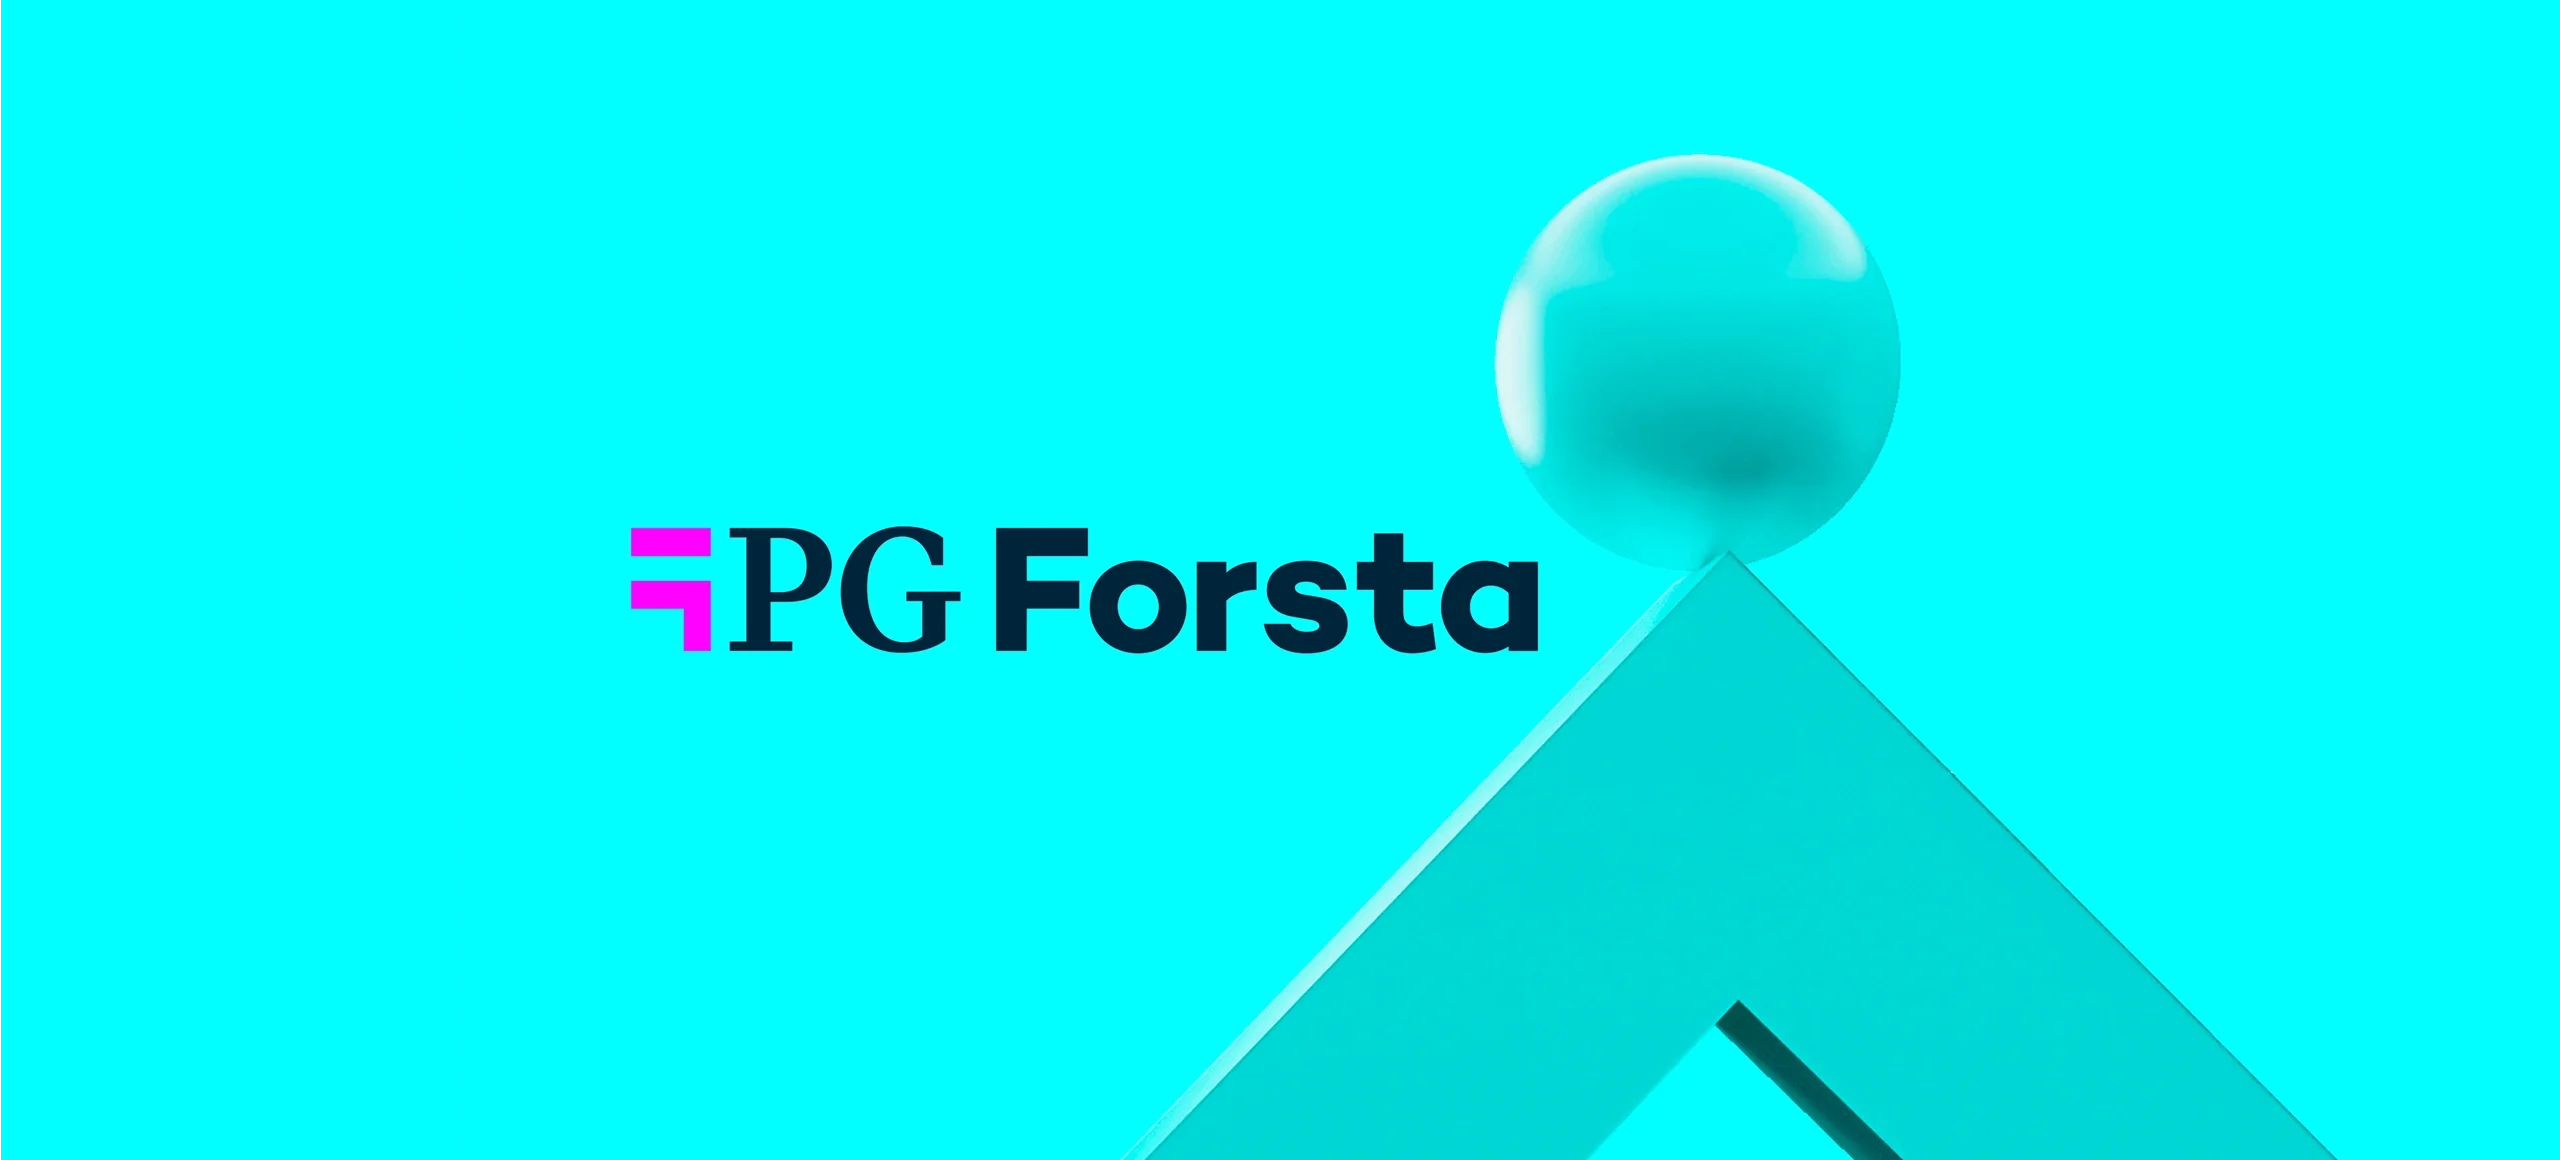 Forsta launches Forsta Discussions, a self-serve video focus group tool for market researchers and customer experience professionals